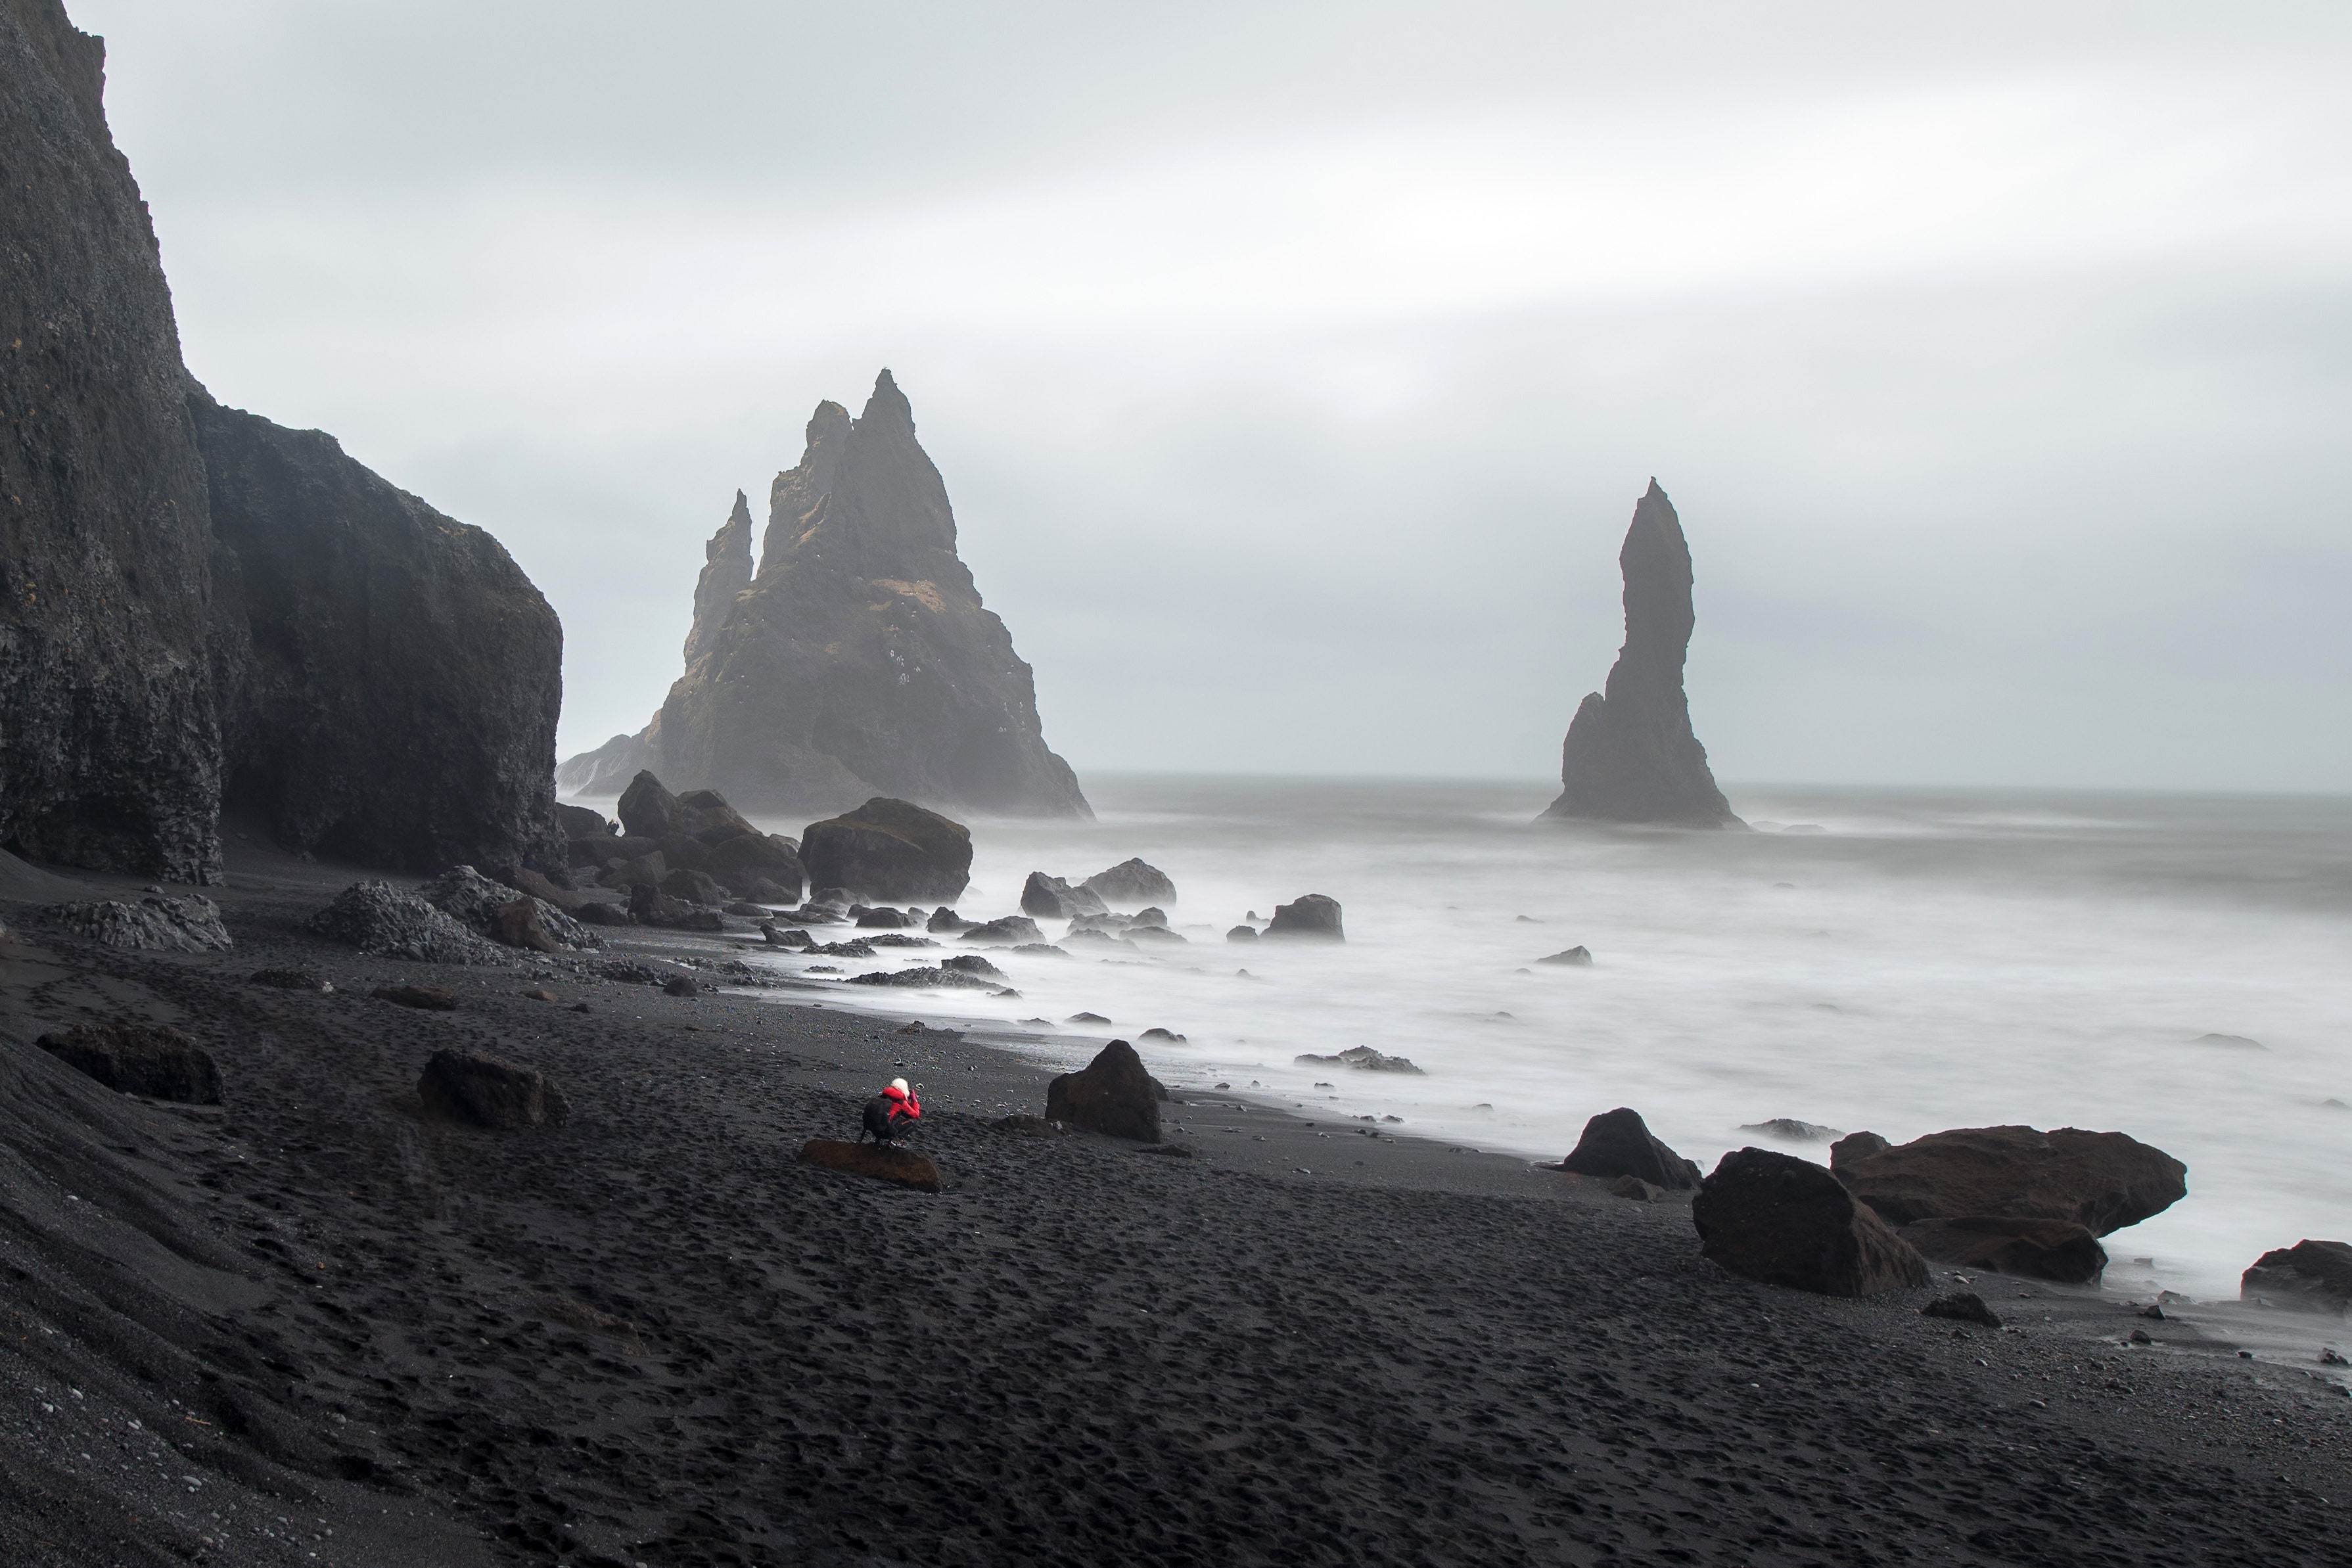 If the moon had a shoreline, it would probably look something like Reynisfjara. Just a 20-minute drive from Vik in southern Iceland, <a href="https://www.cntraveler.com/gallery/black-and-white-places-around-the-world?mbid=synd_msn_rss&utm_source=msn&utm_medium=syndication">jet-black sand</a> and spectacularly shaped basalt columns make this beach one of the most impressive sites in an already impressive country.<p>Sign up to receive the latest news, expert tips, and inspiration on all things travel</p><a href="https://www.cntraveler.com/newsletter/the-daily?sourceCode=msnsend">Inspire Me</a>